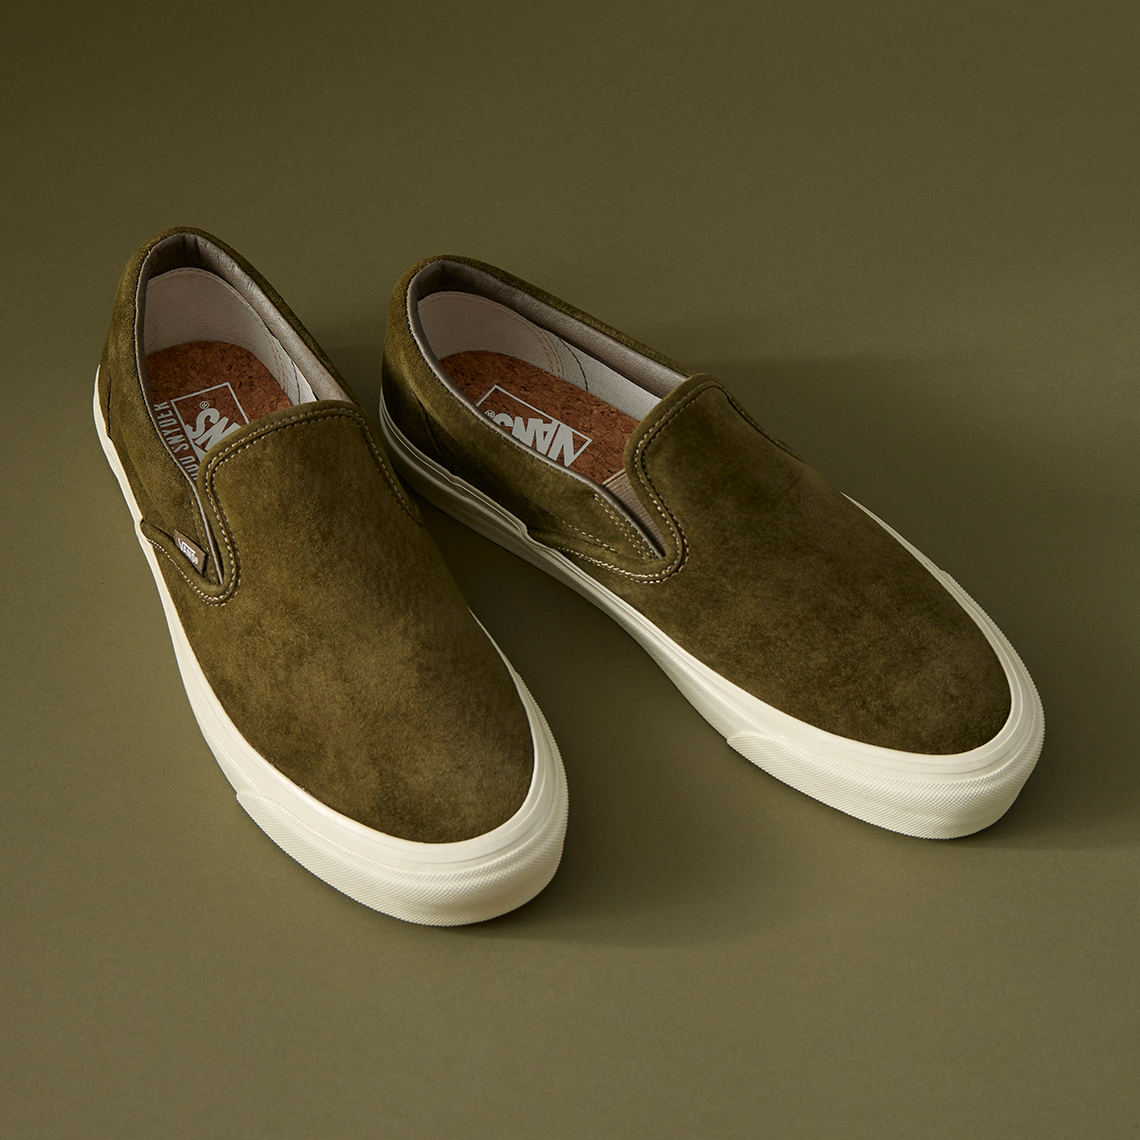 Todd Snyder Vans The Dirty Martini Release Date 1